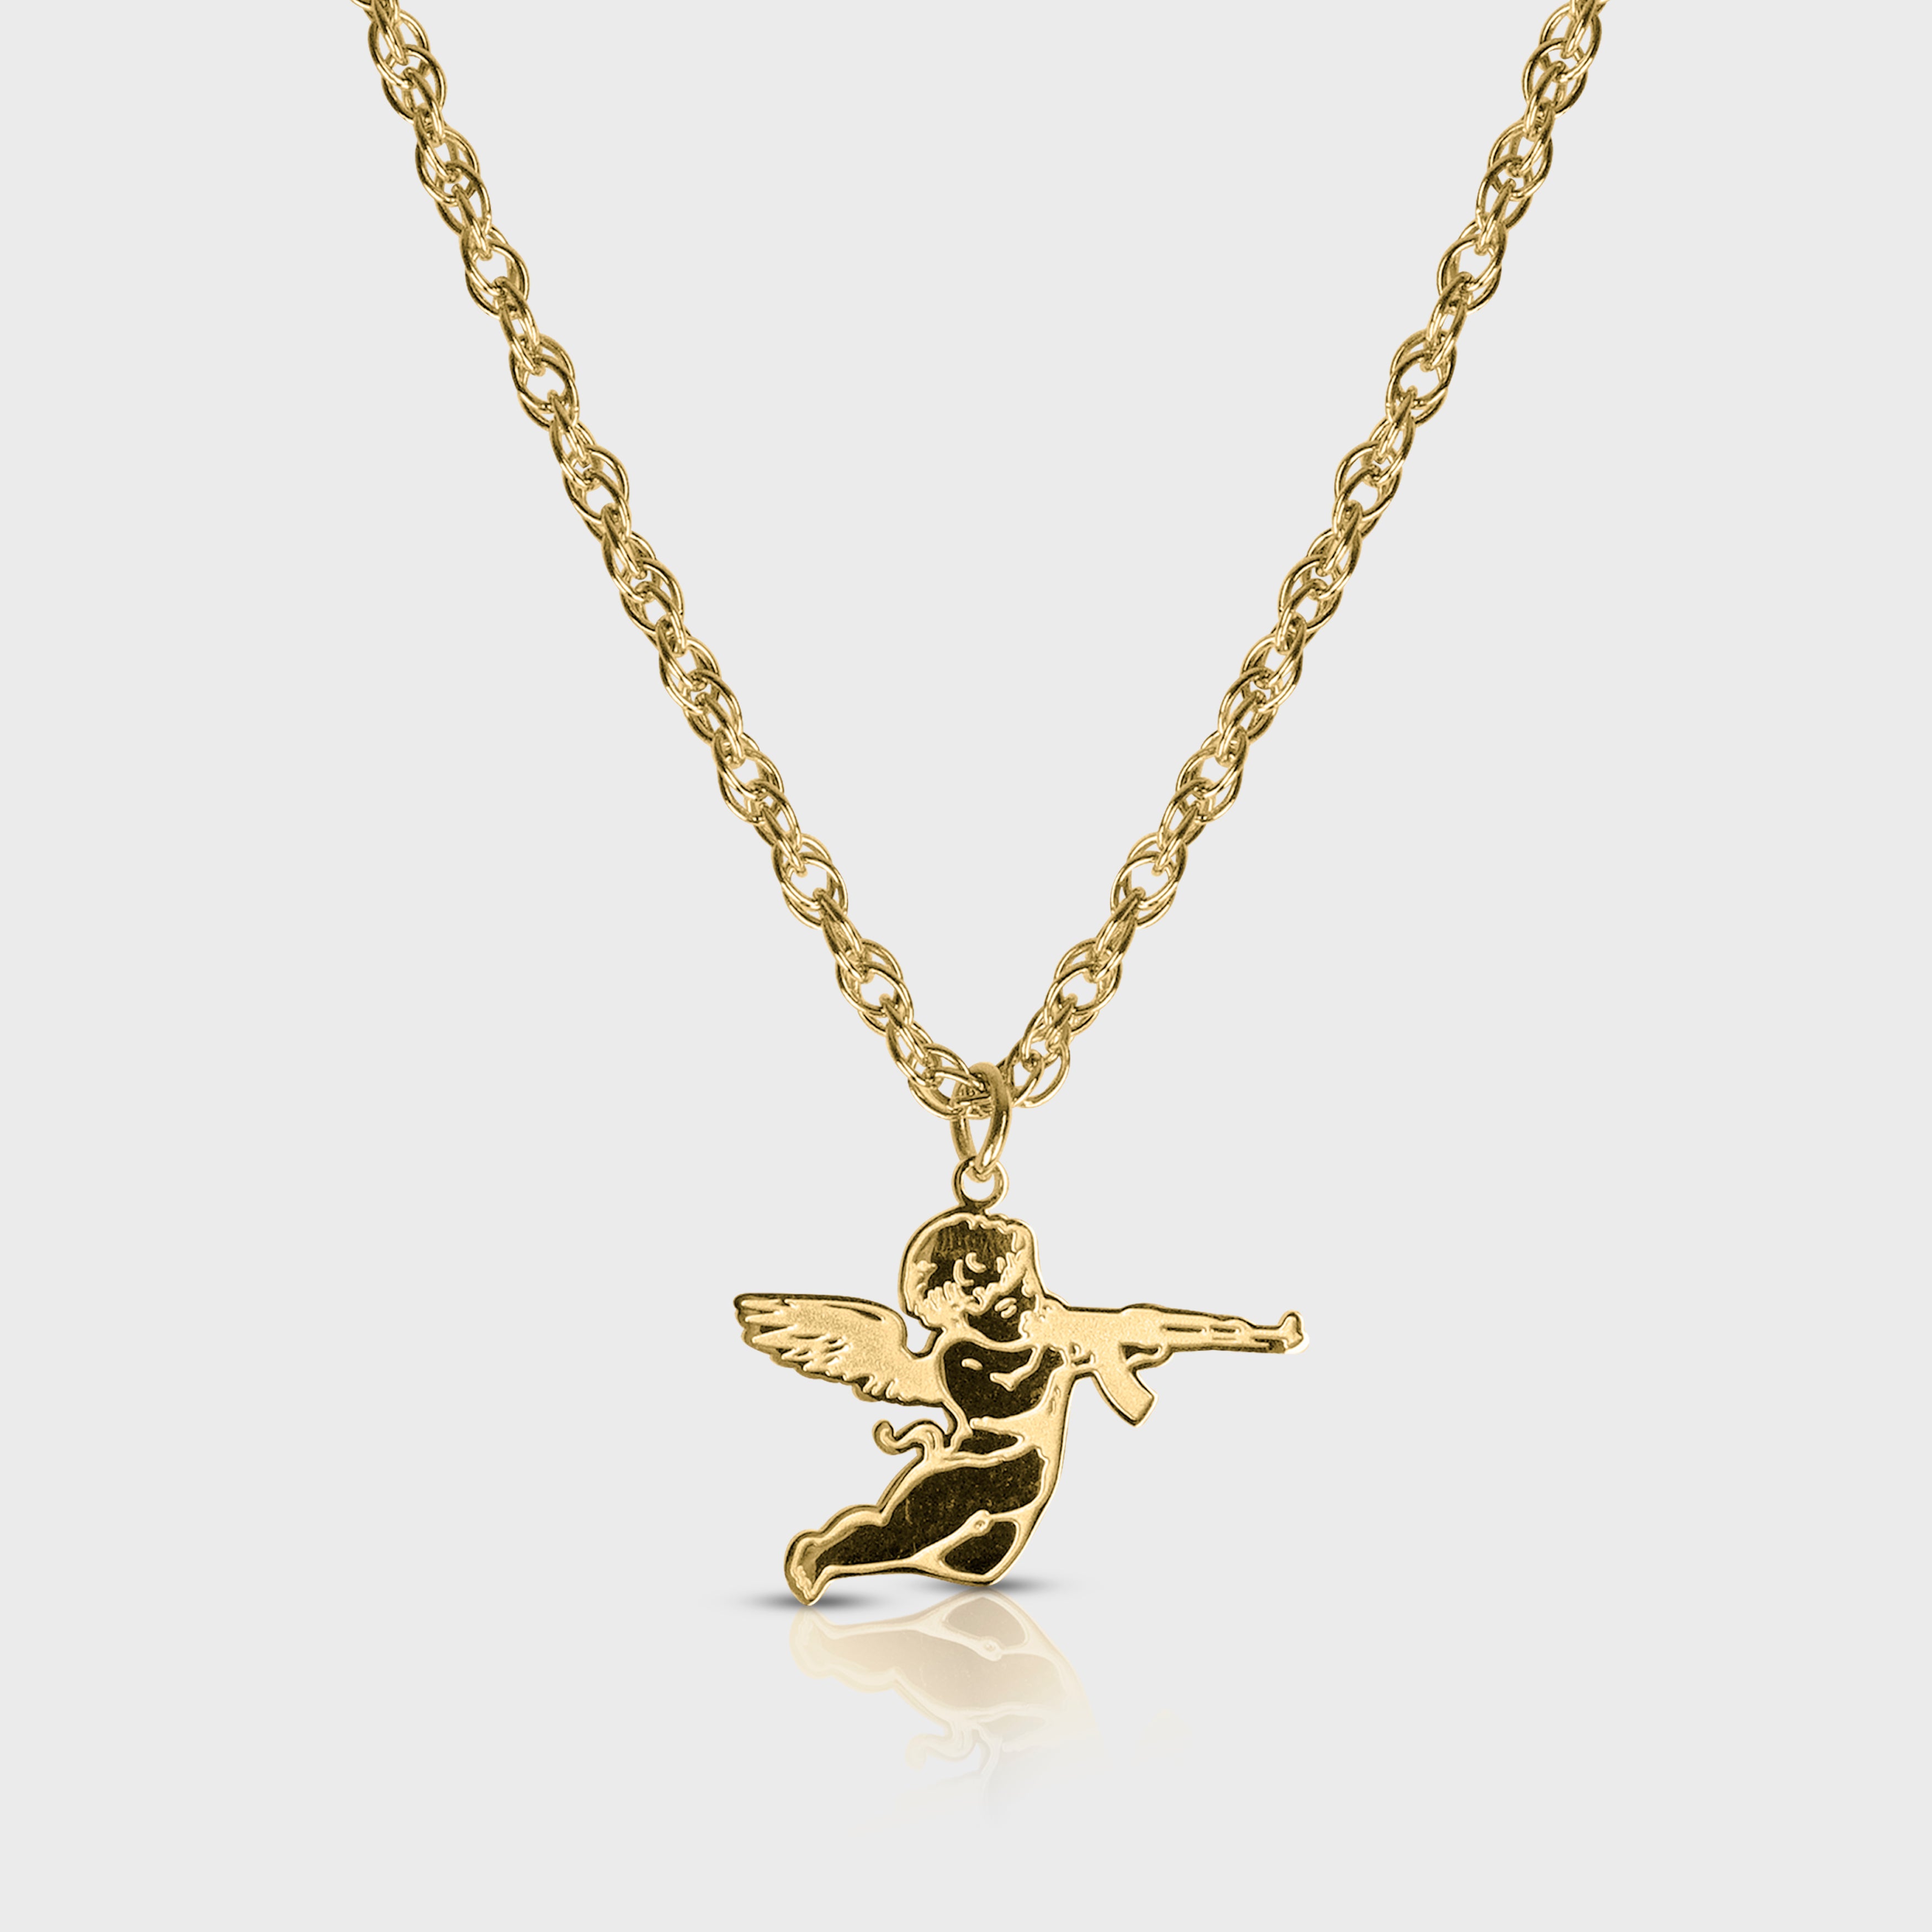 AK-47 ANGEL NECKLACE - GOLD